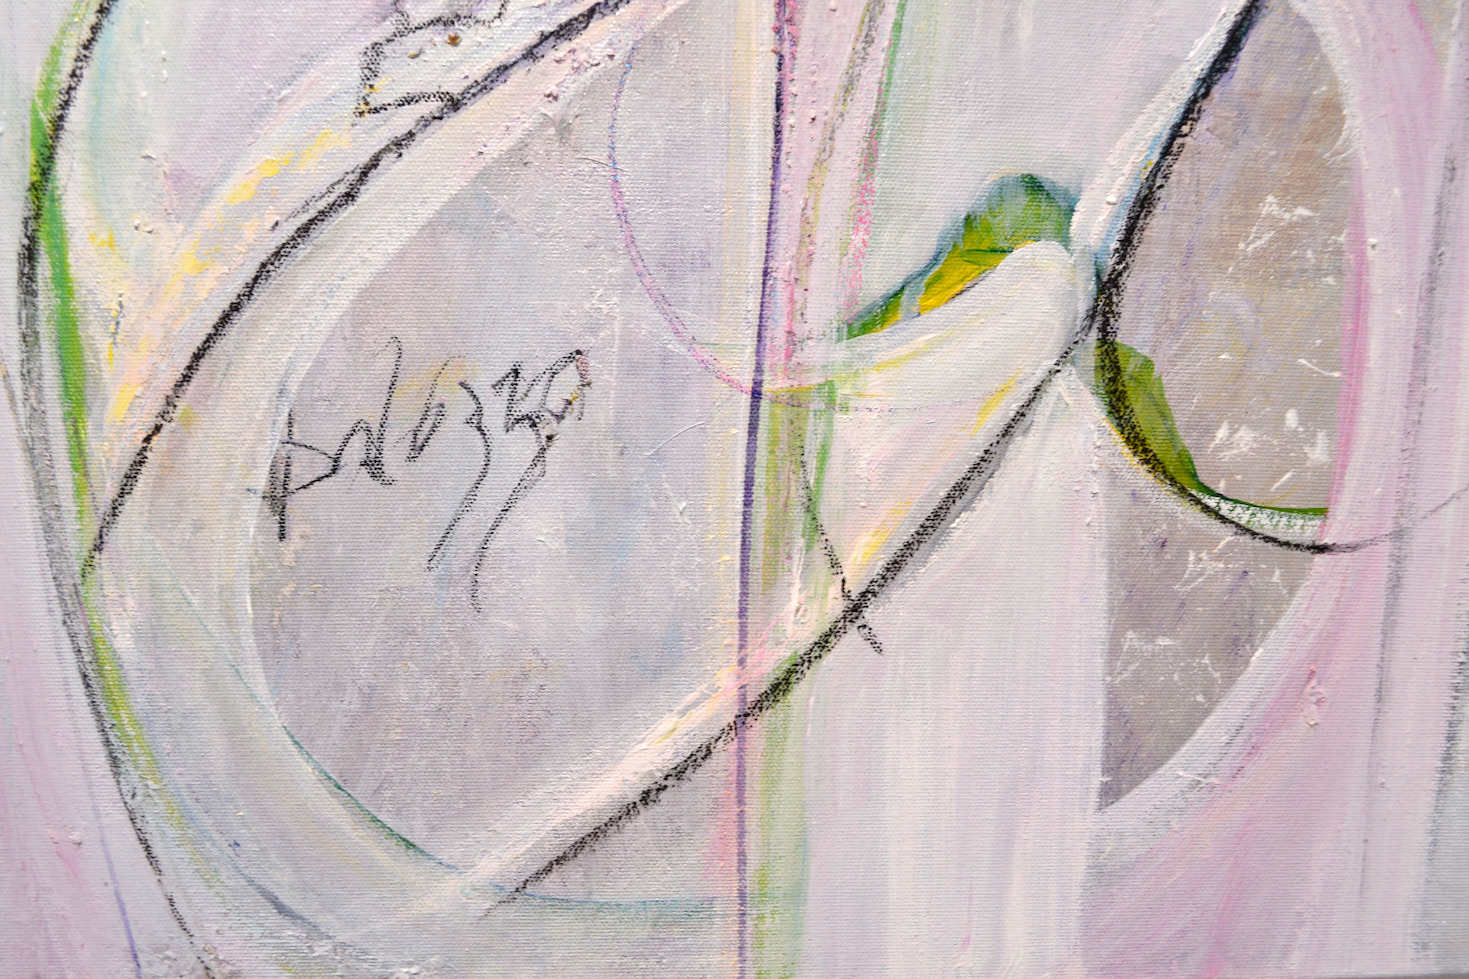 Close Up Signature Of Acrylic Painting "Yellow Splendour" By Lucette Dalozzo